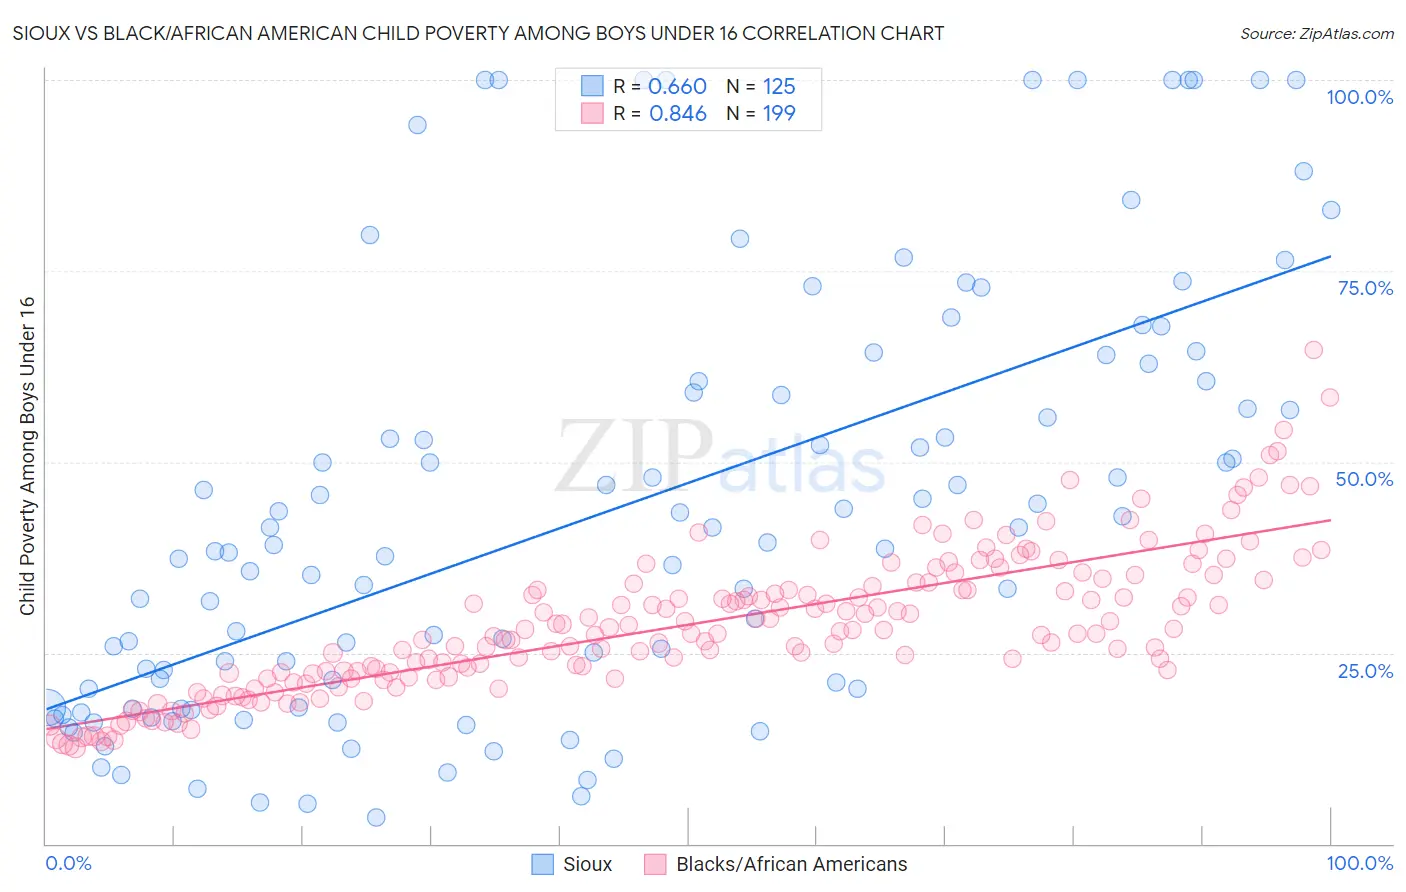 Sioux vs Black/African American Child Poverty Among Boys Under 16